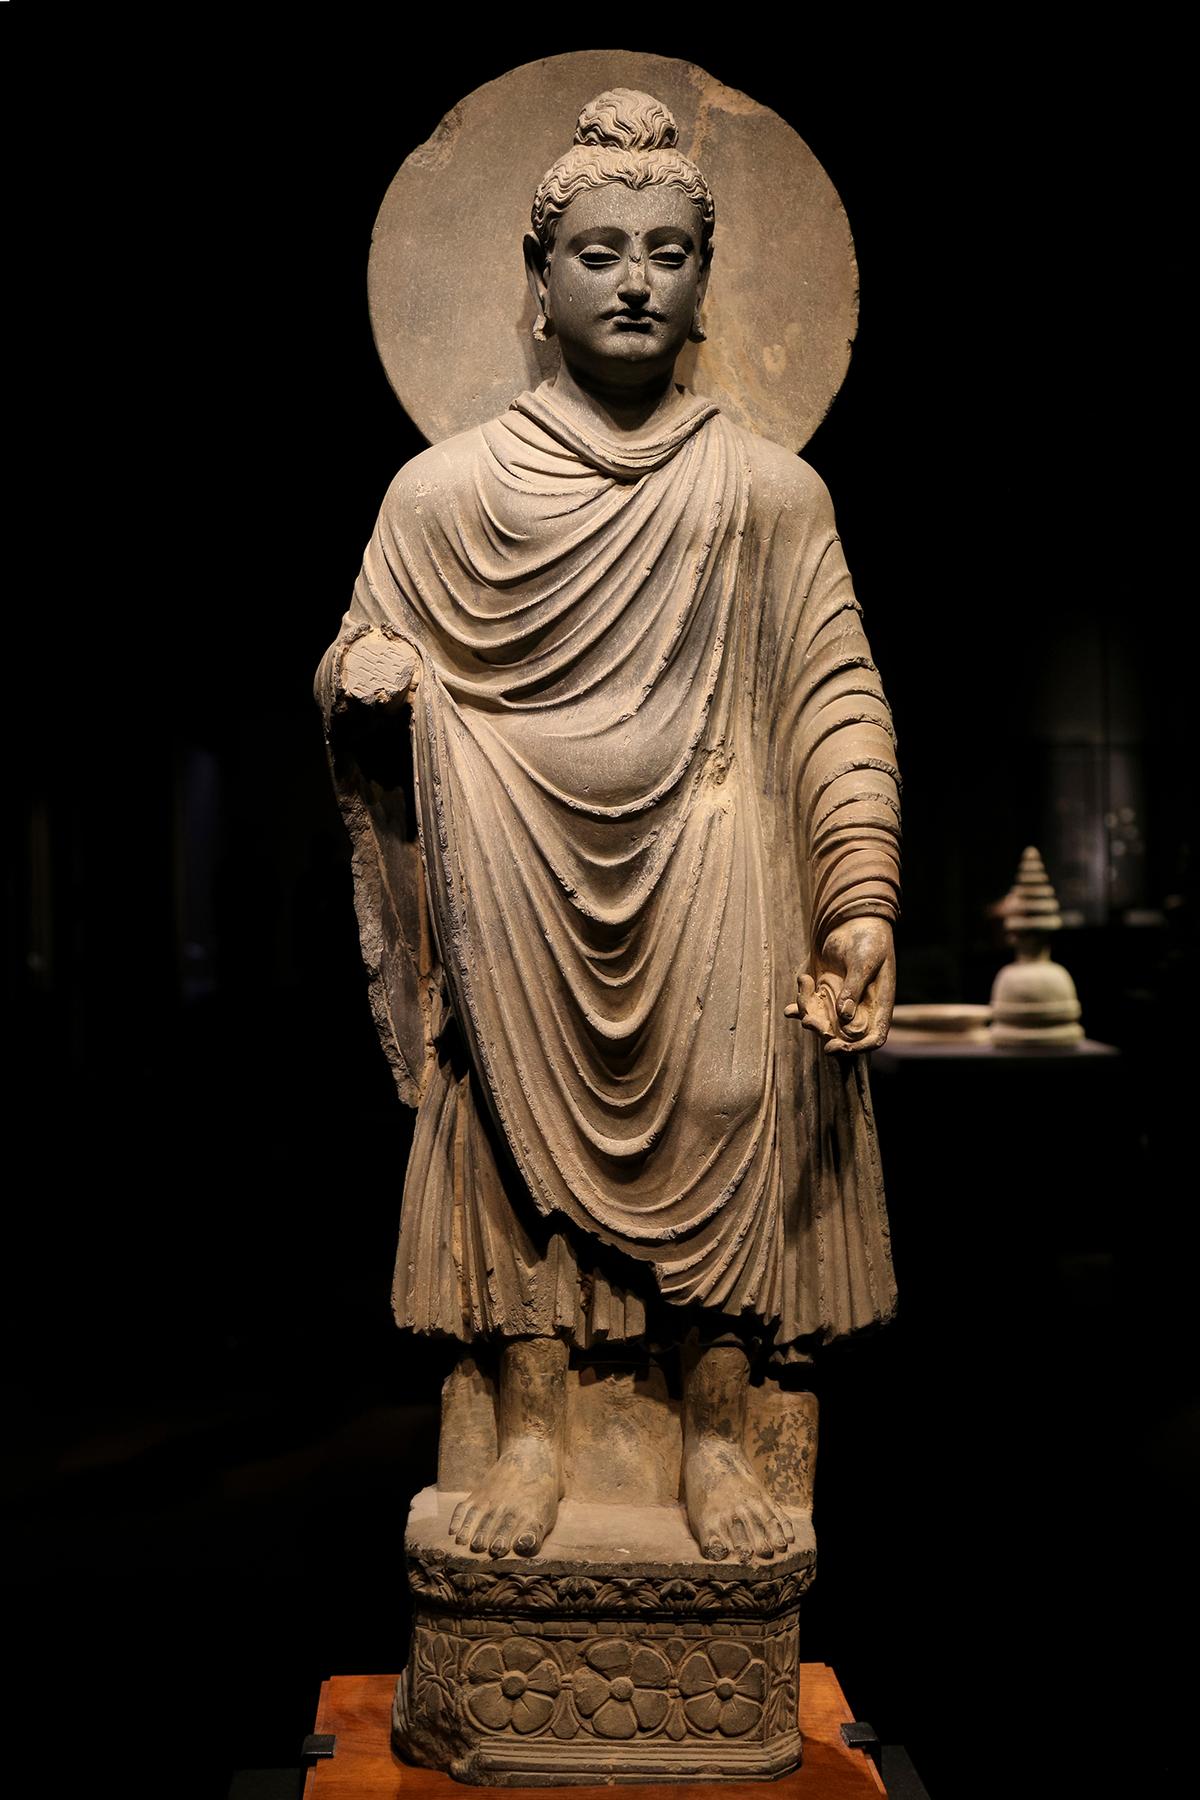 One of the first representations of the Buddha during the Kushan empire (A.D. 30–375) in the historical region of Gandhara, Pakistan. (Gumpanat/Shutterstock)